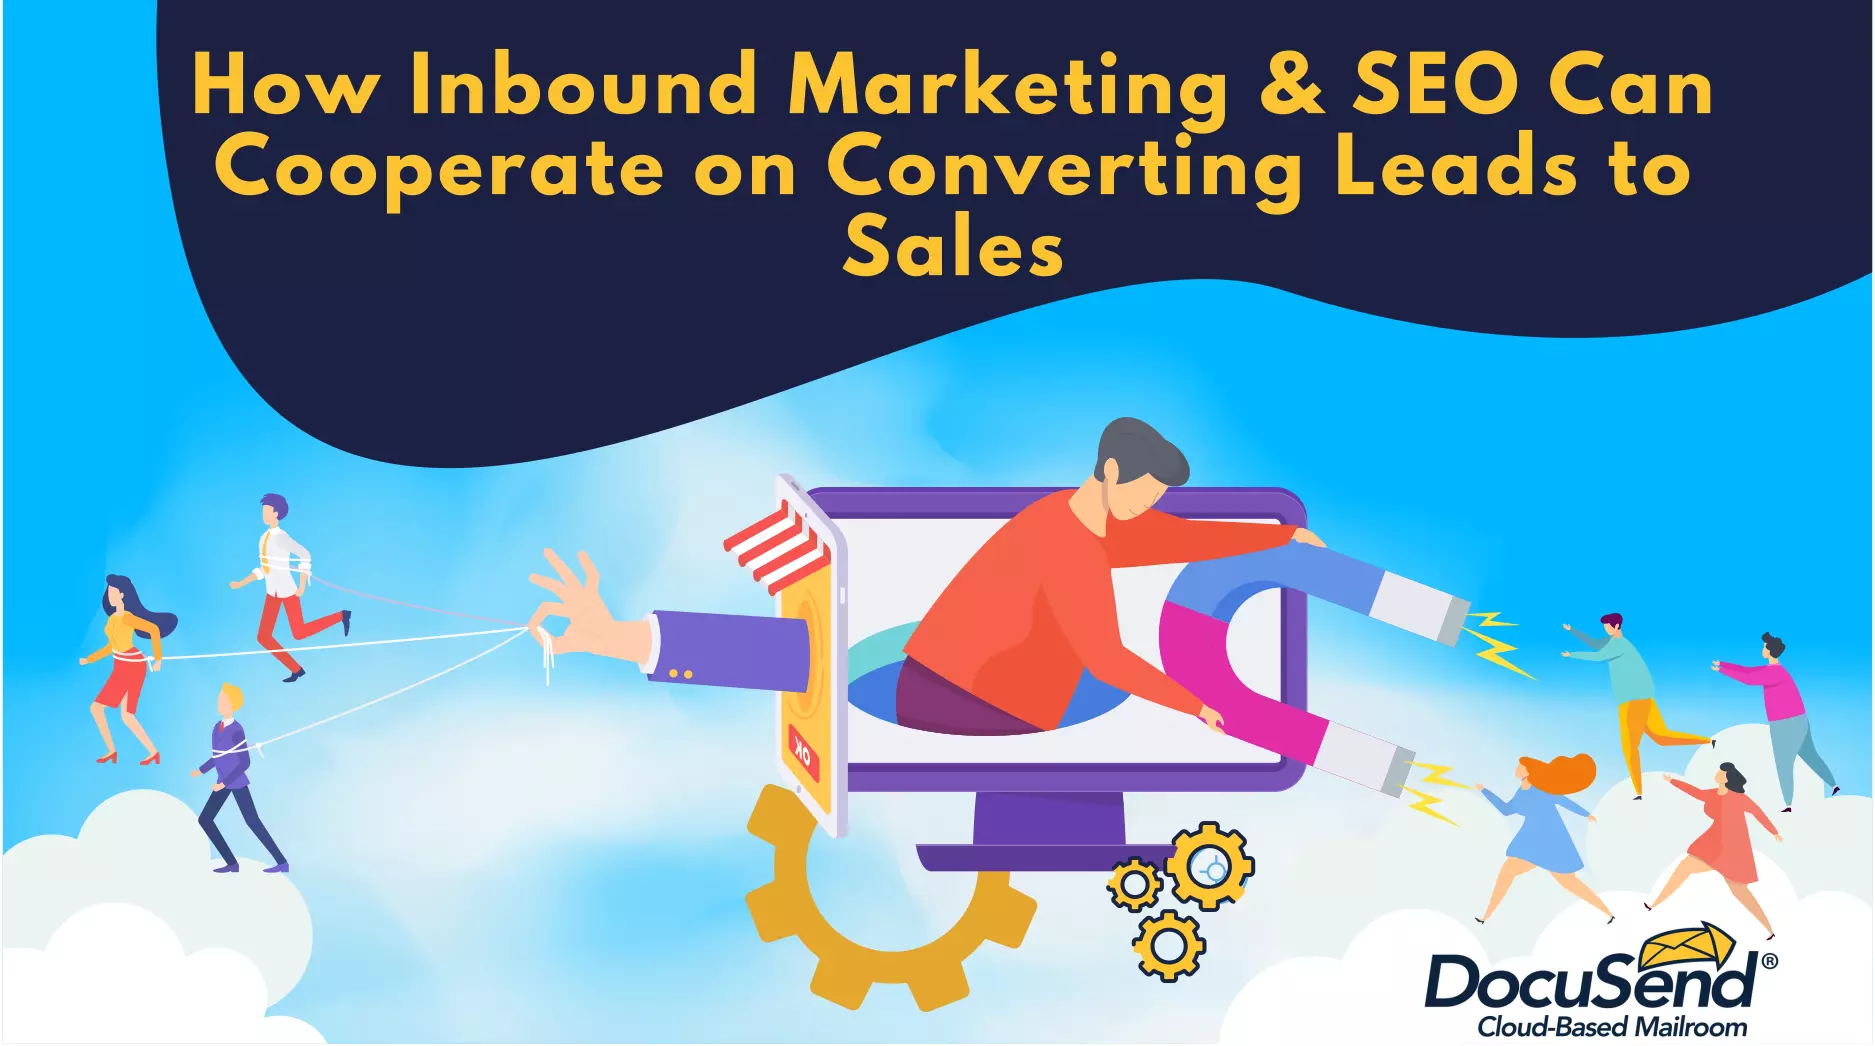 How Inbound Marketing & SEO Can Cooperate on Converting Leads to Sales